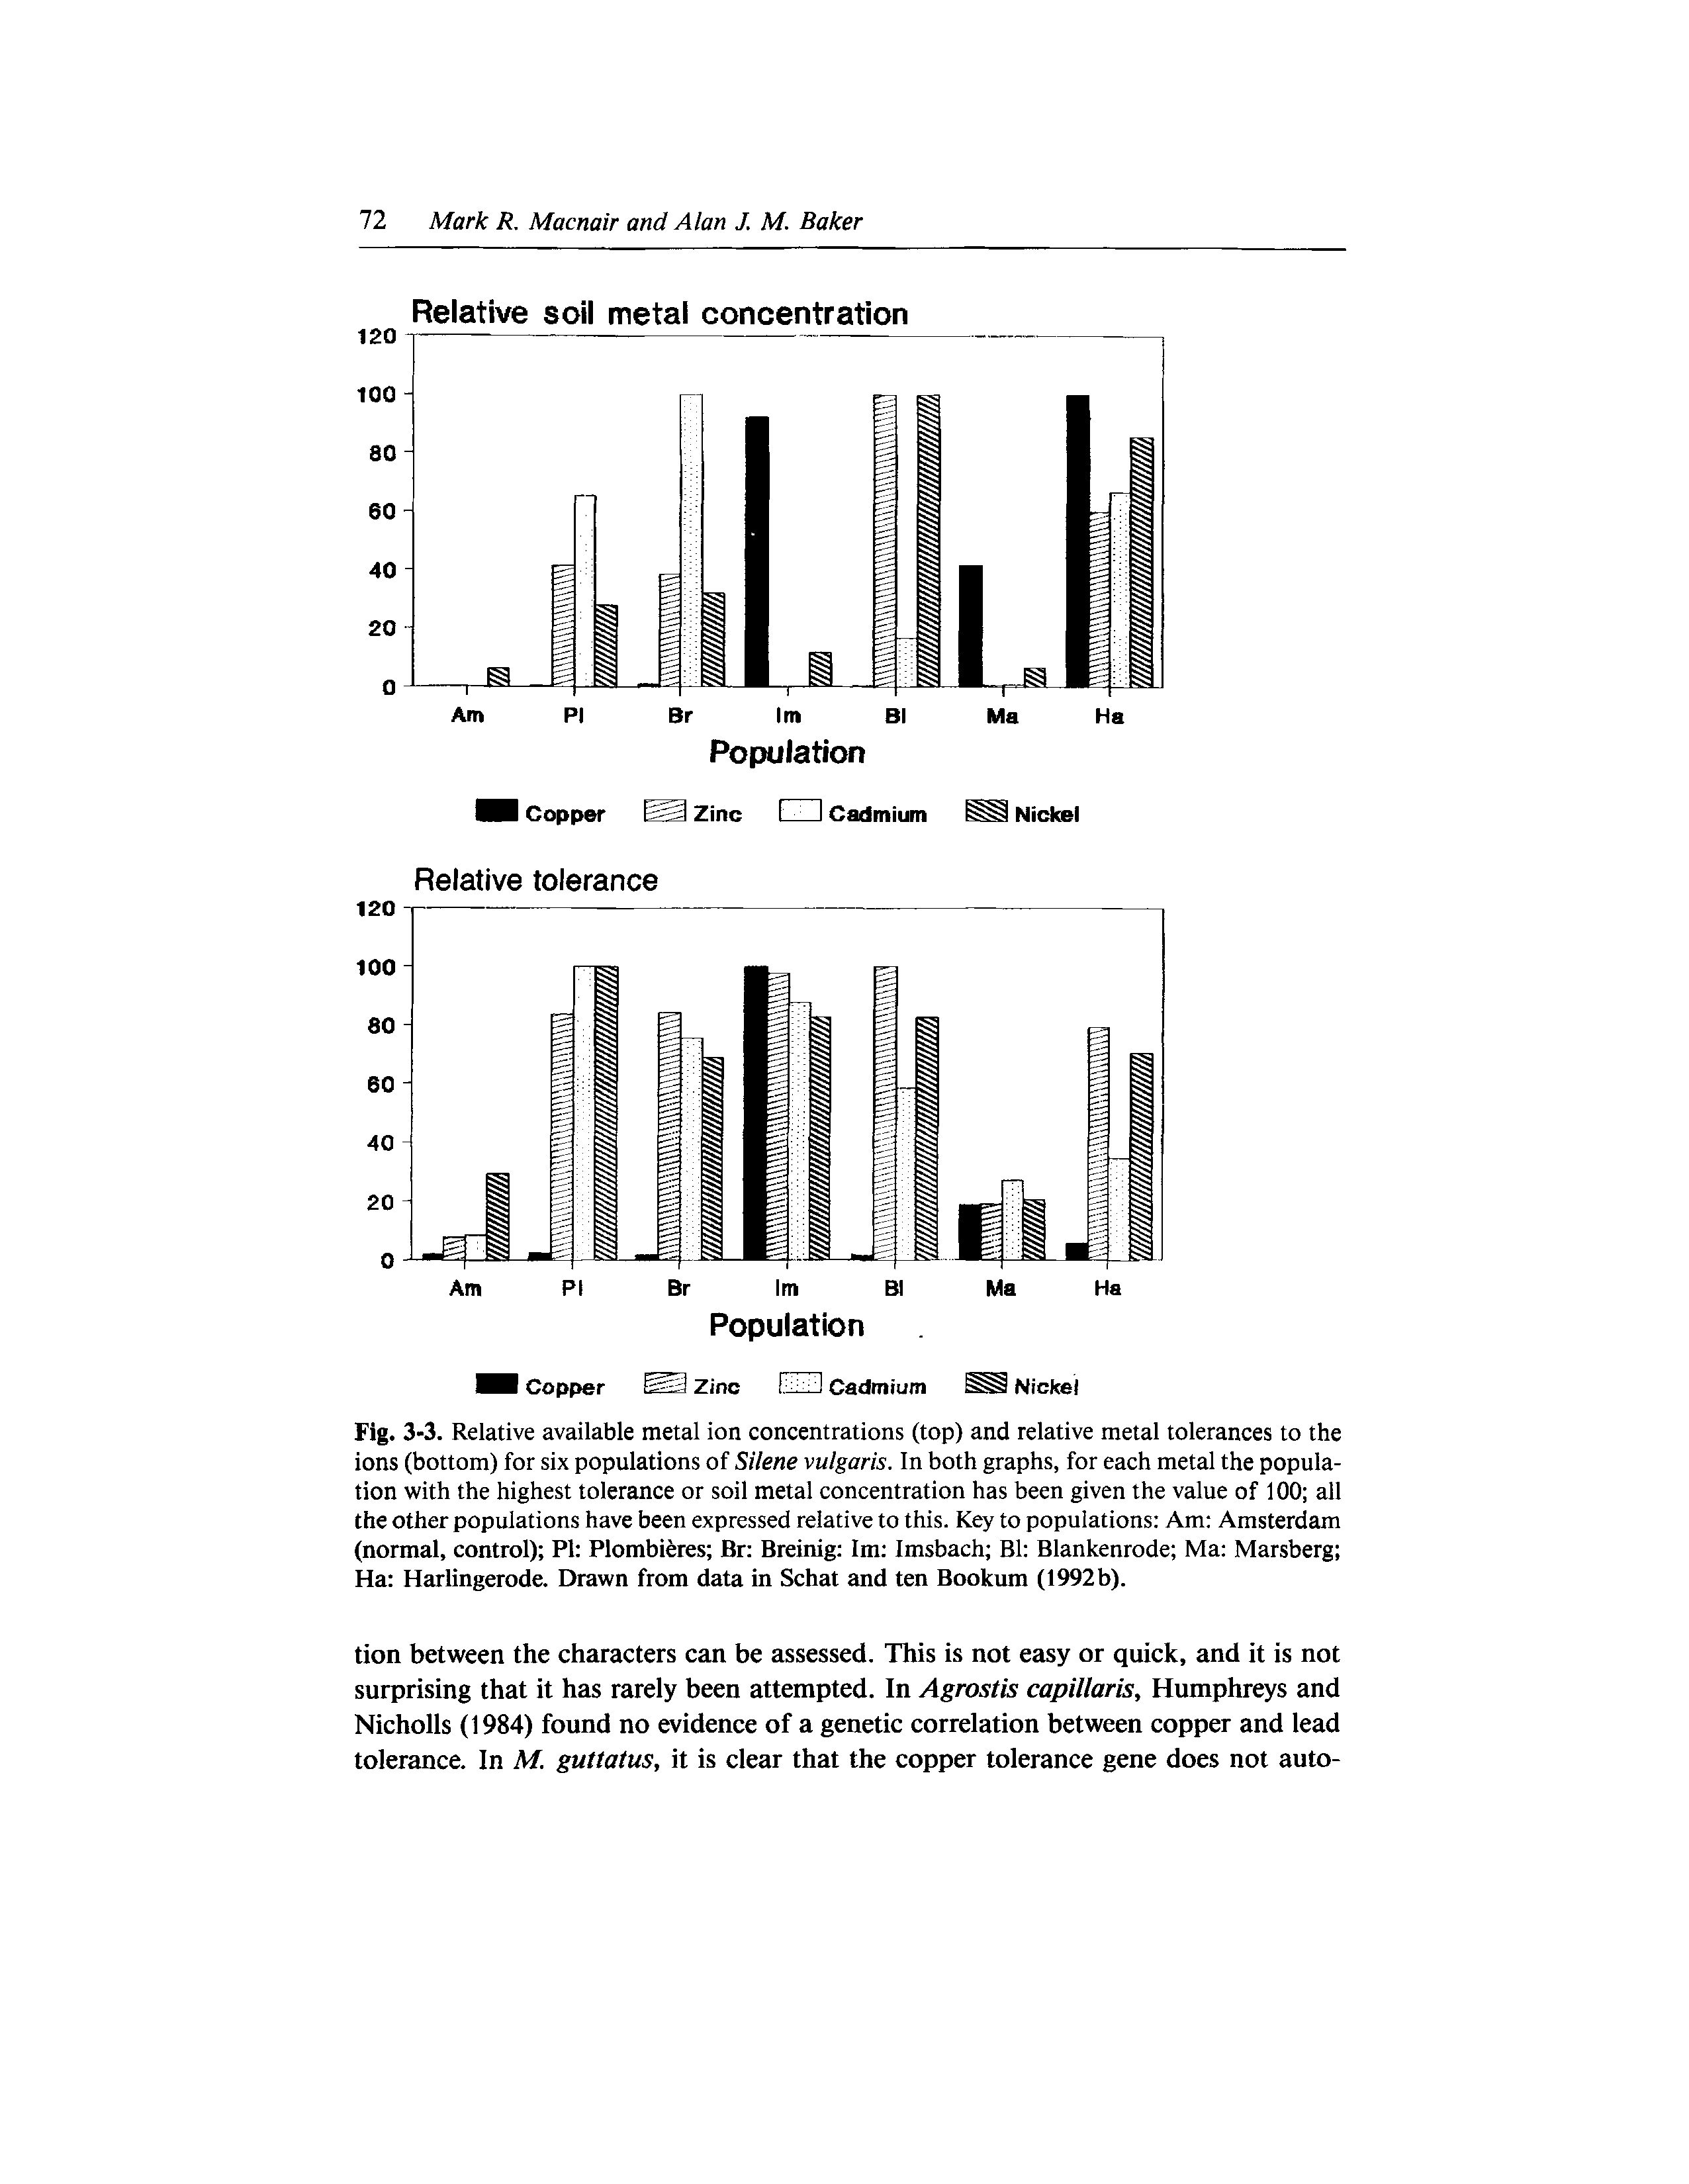 Fig. 3-3. Relative available metal ion concentrations (top) and relative metal tolerances to the ions (bottom) for six populations of Silene vulgaris. In both graphs, for each metal the population with the highest tolerance or soil metal concentration has been given the value of 100 all the other populations have been expressed relative to this. Key to populations Am Amsterdam (normal, control) PI Plombieres Br Breinig Im Imsbach Bl Blankenrode Ma Marsberg Ha Harlingerode. Drawn from data in Schat and ten Bookum (1992b).